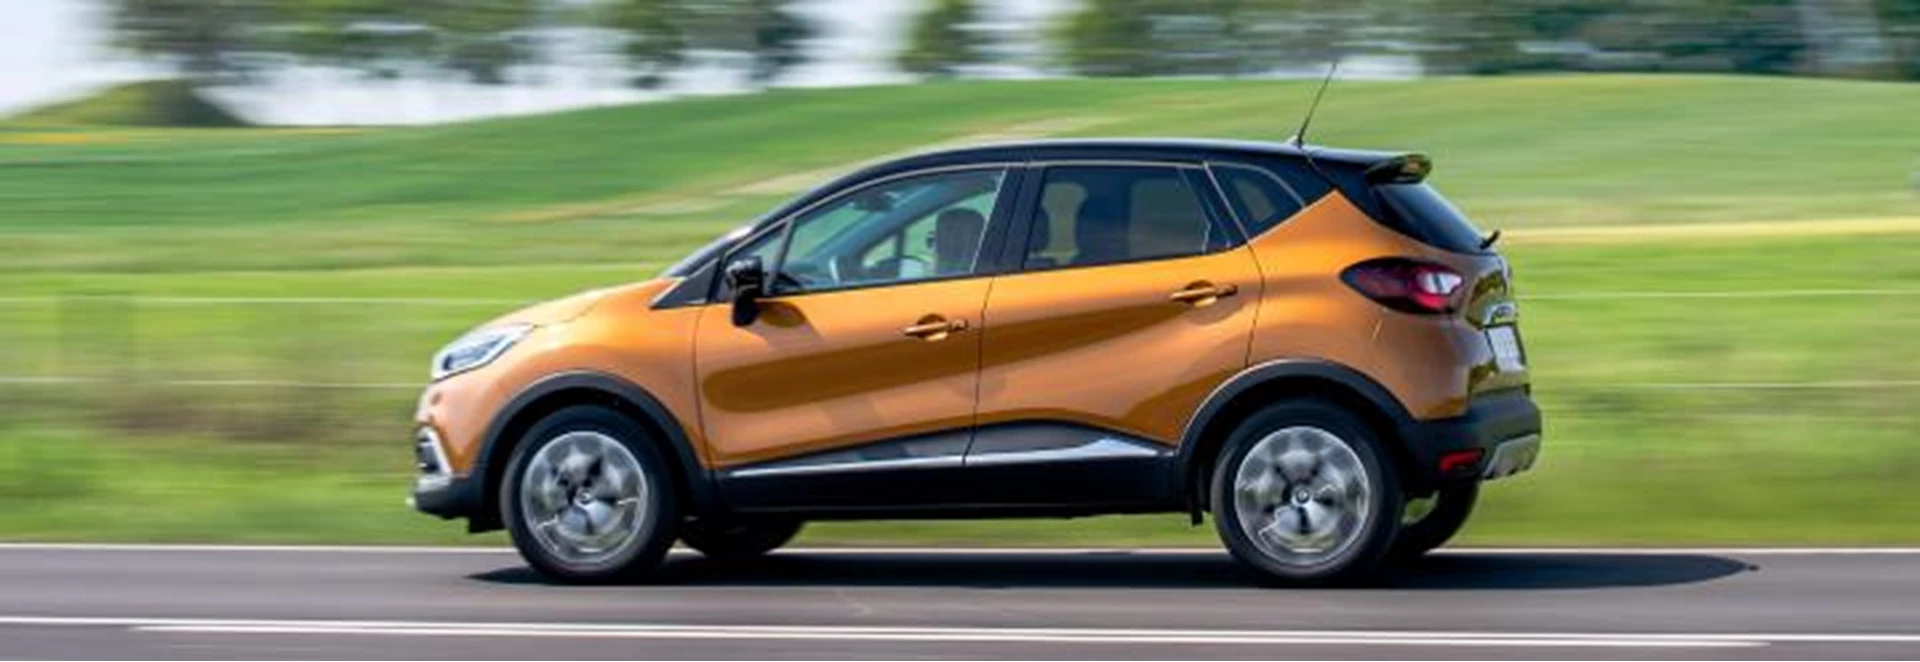 Renault finance offers in Autumn 2019: How much you can save